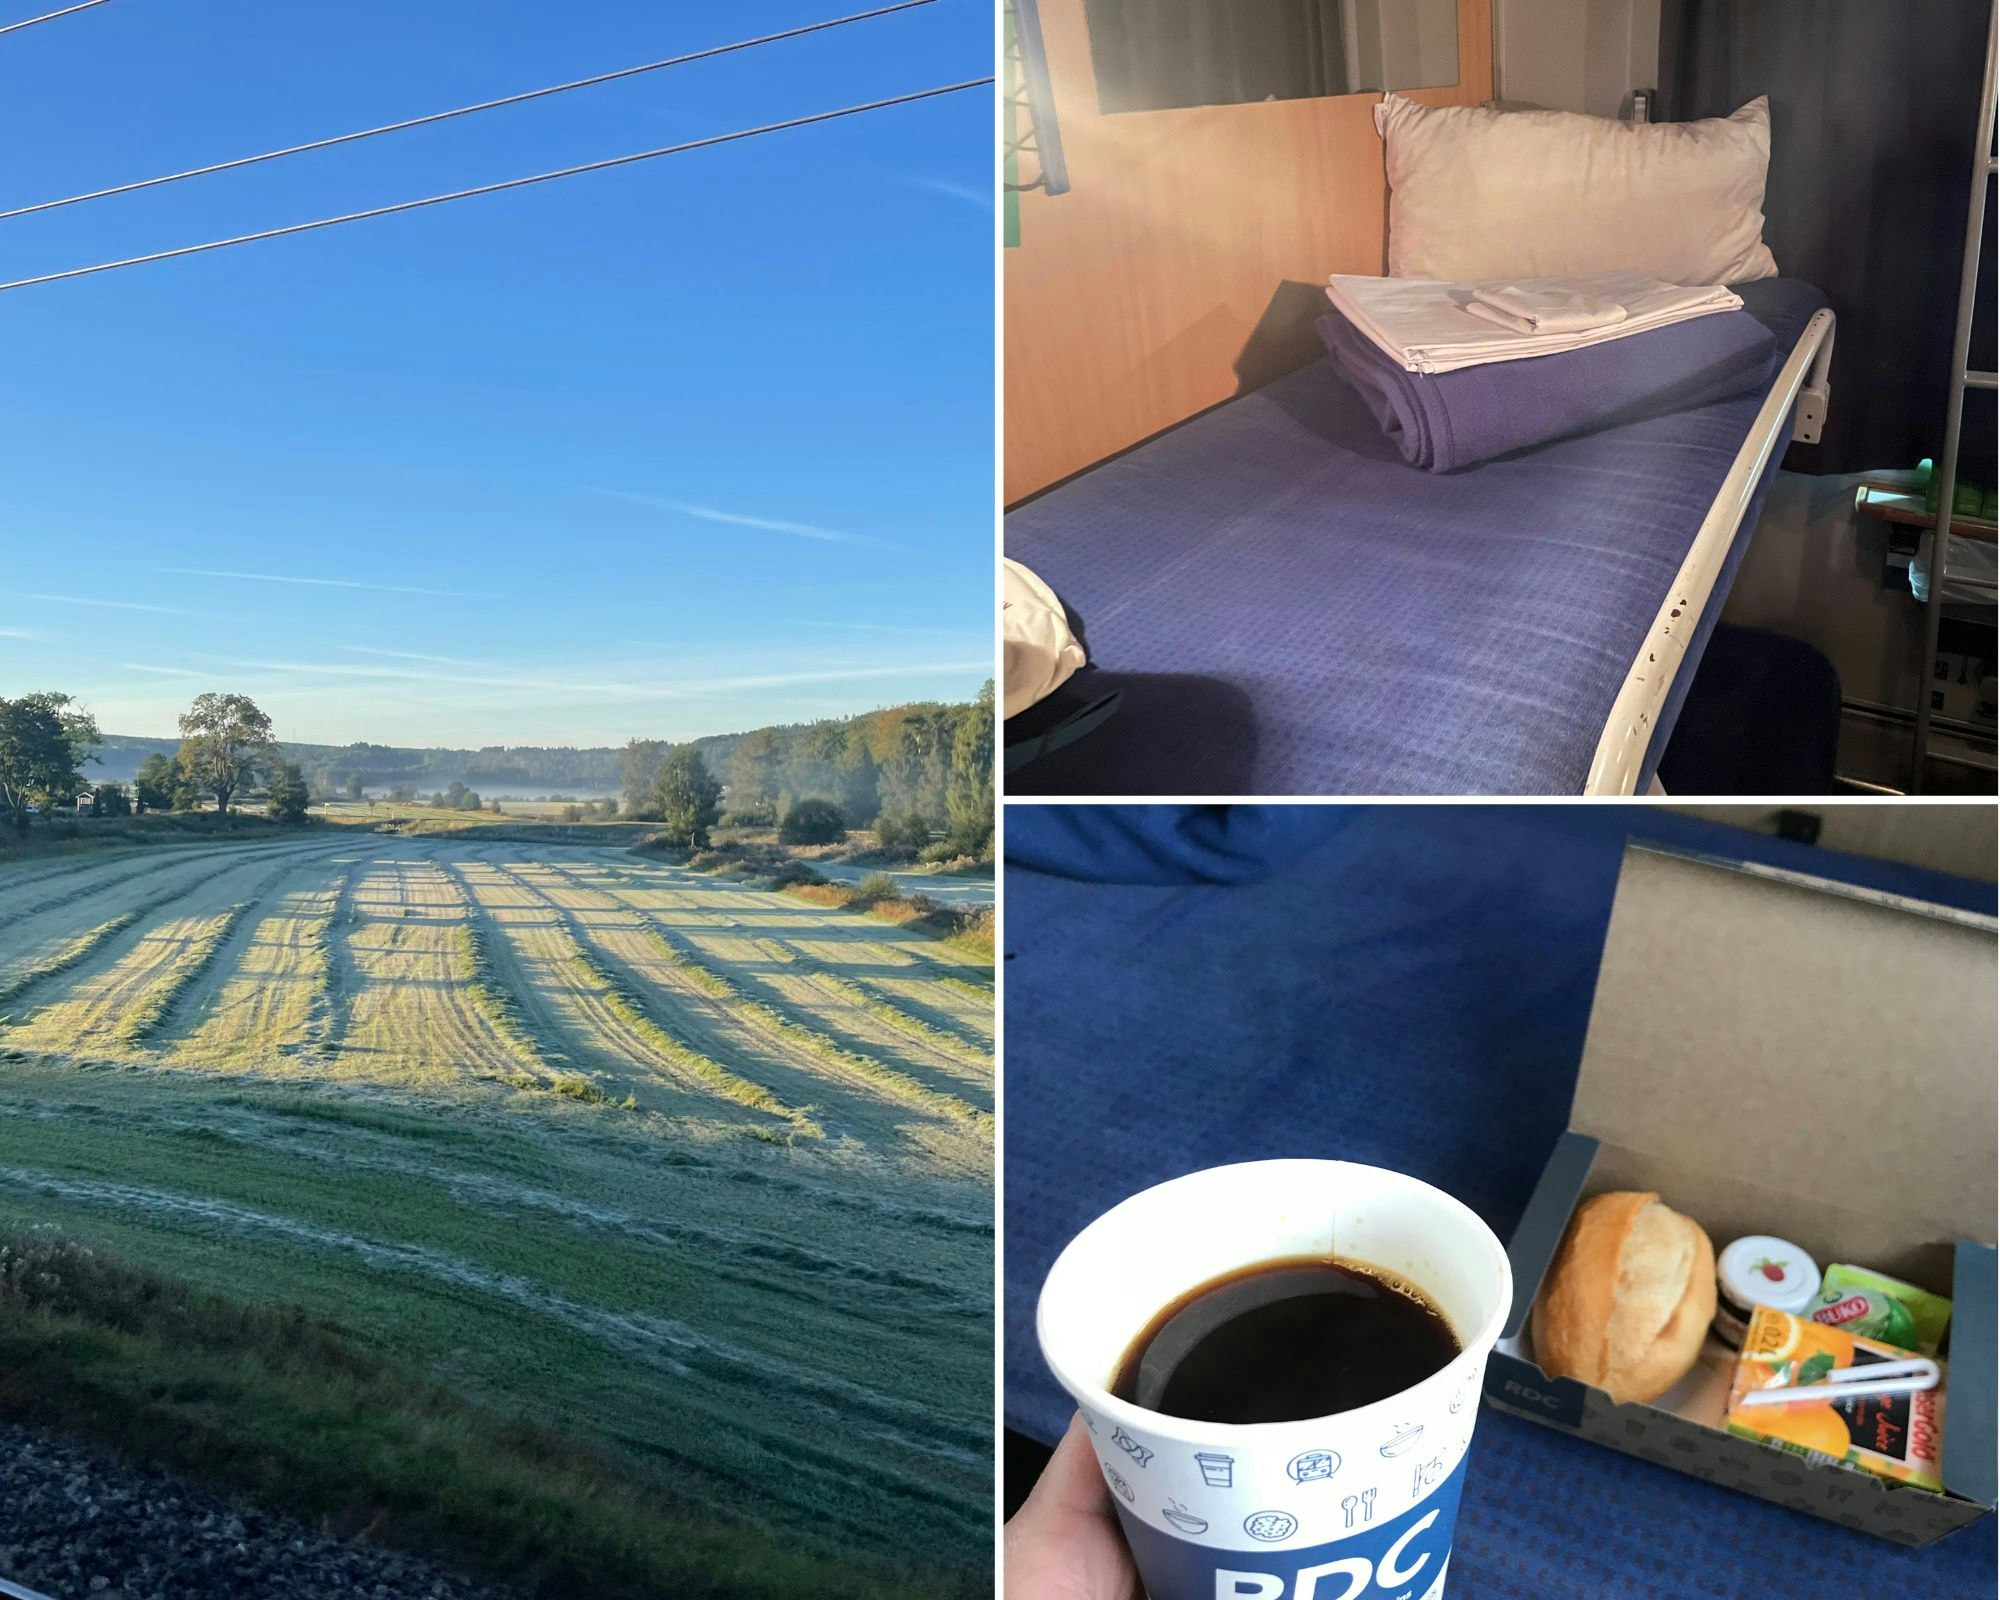 The Swedish countryside, a train bed and a cup of coffee in the morning.